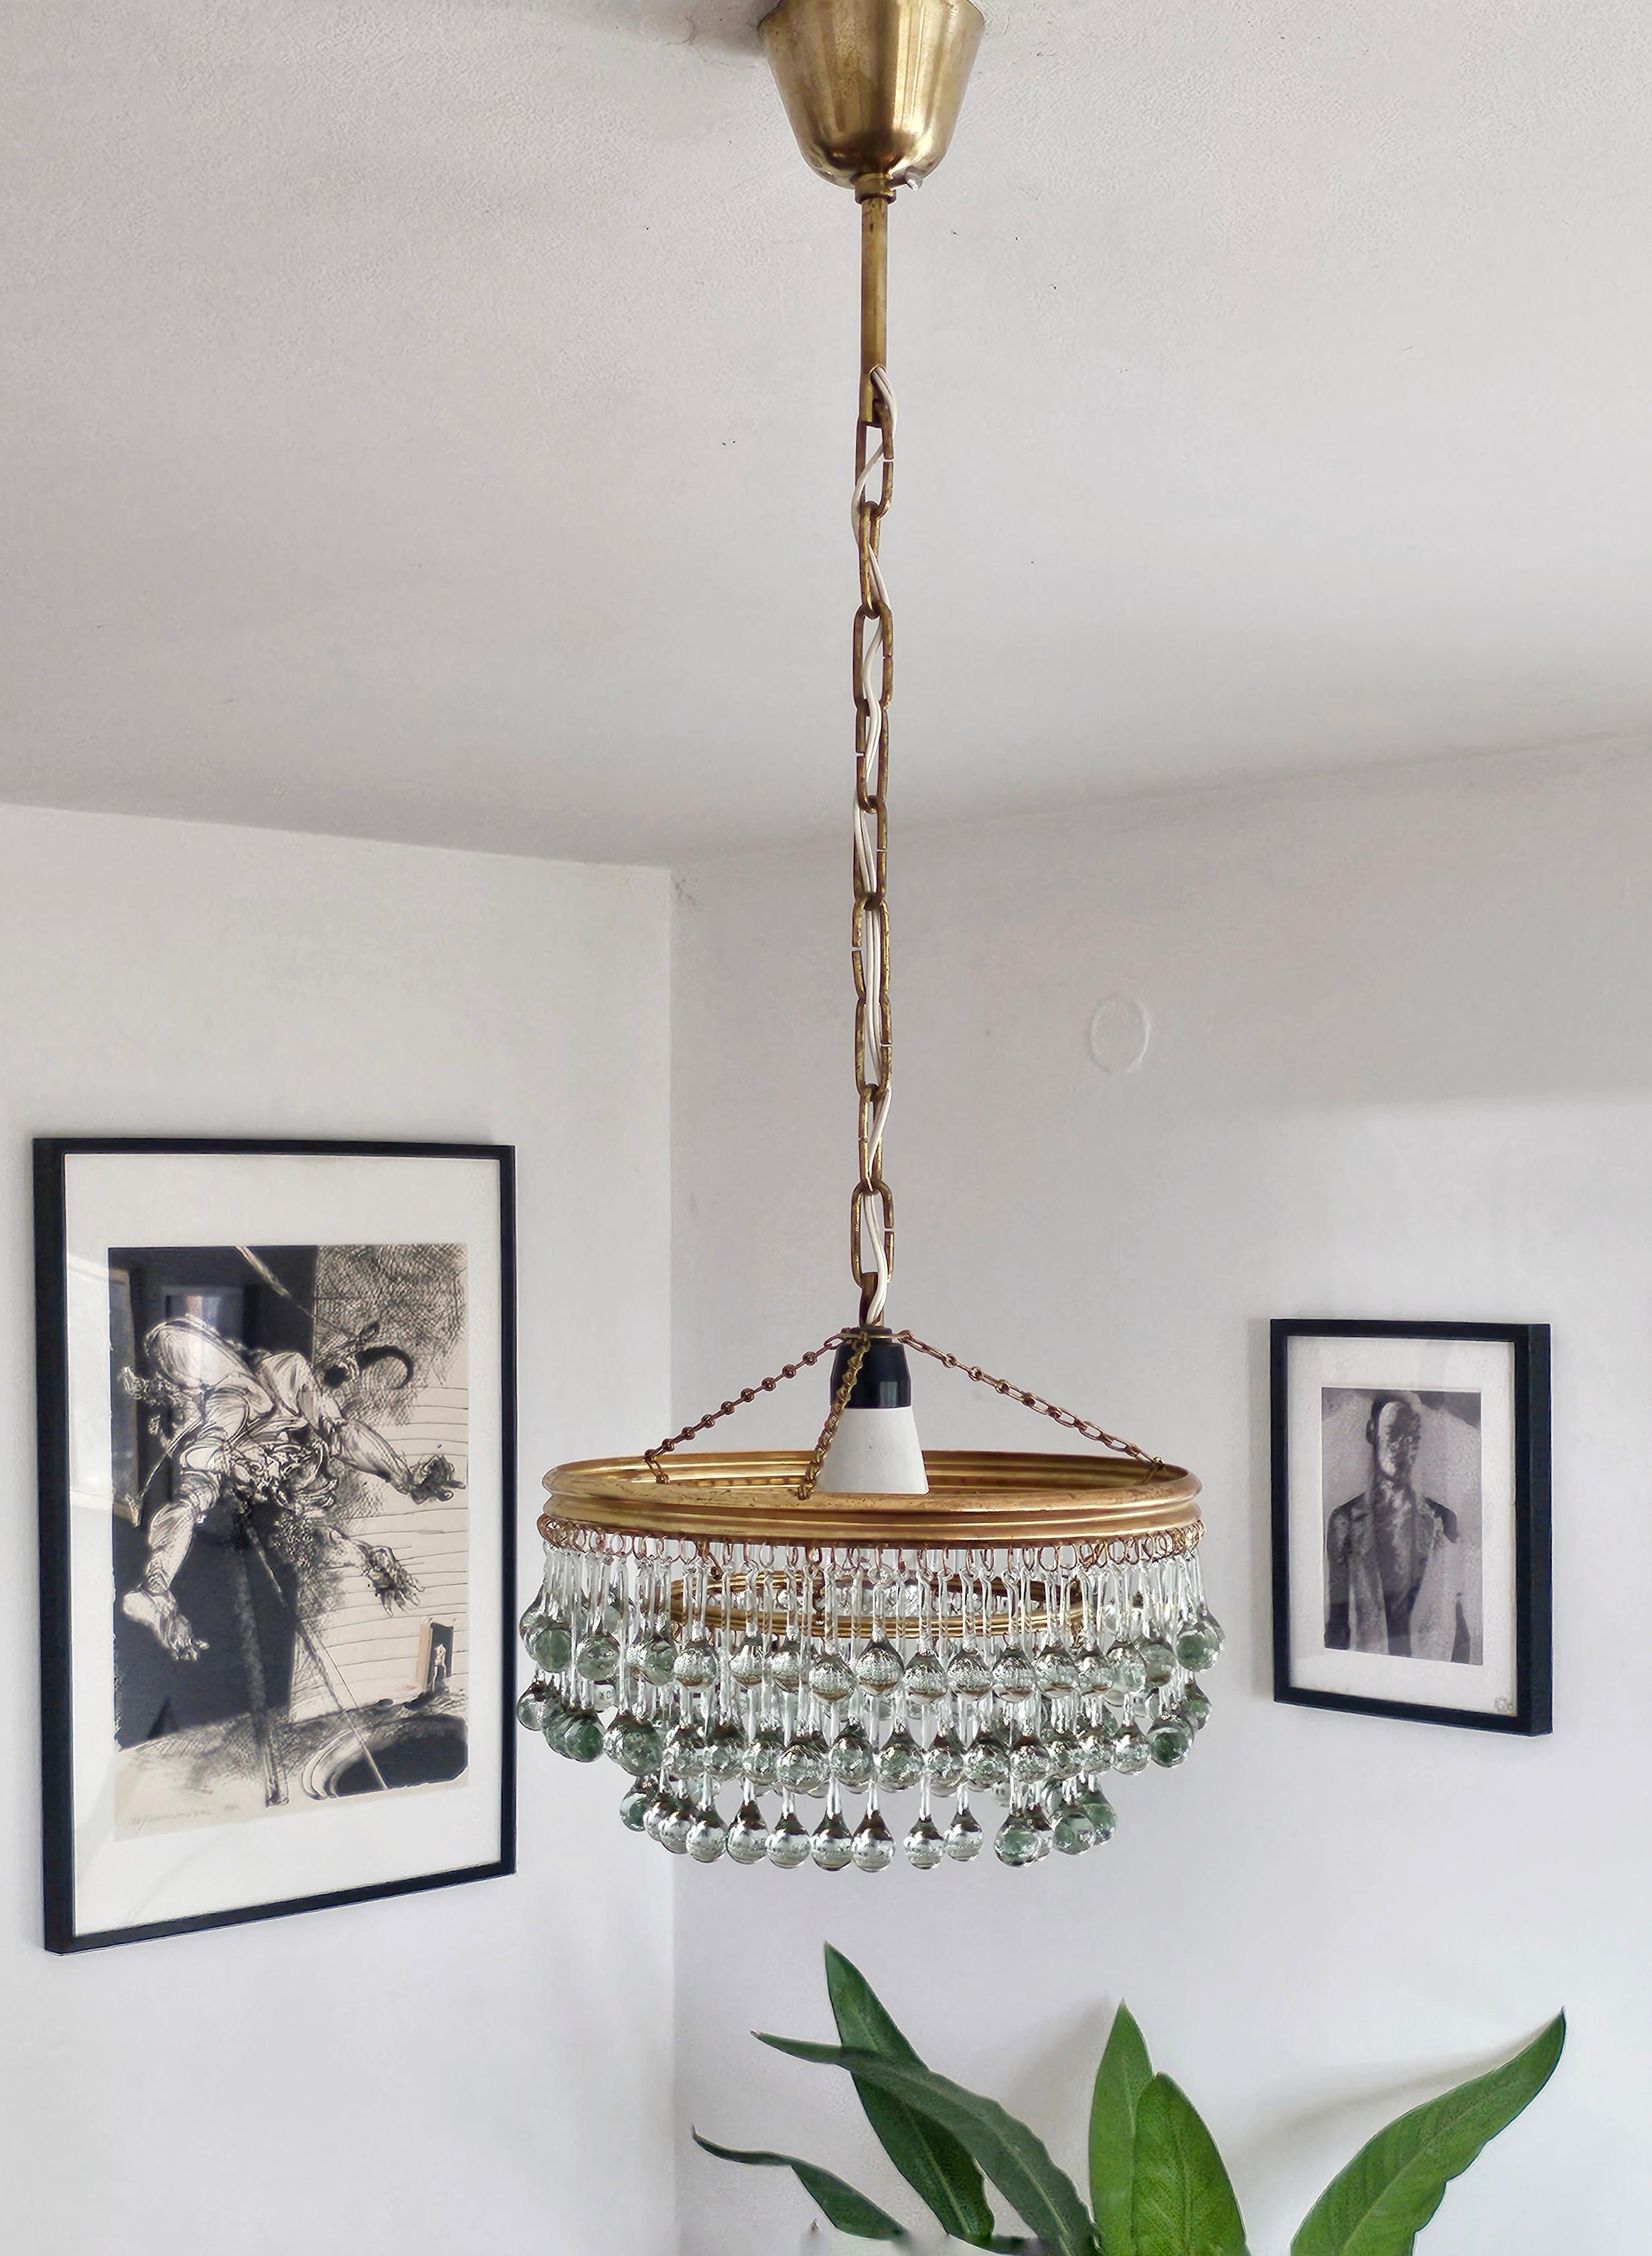 In this listing you will find a gorgeous, small Hollywood Regency chandelier with beautiful, small glass teardrops attached to brass fixture. This extremely elegant piece is perfect for small spaces - kitchen, entryway or bathroom. Made in Austria